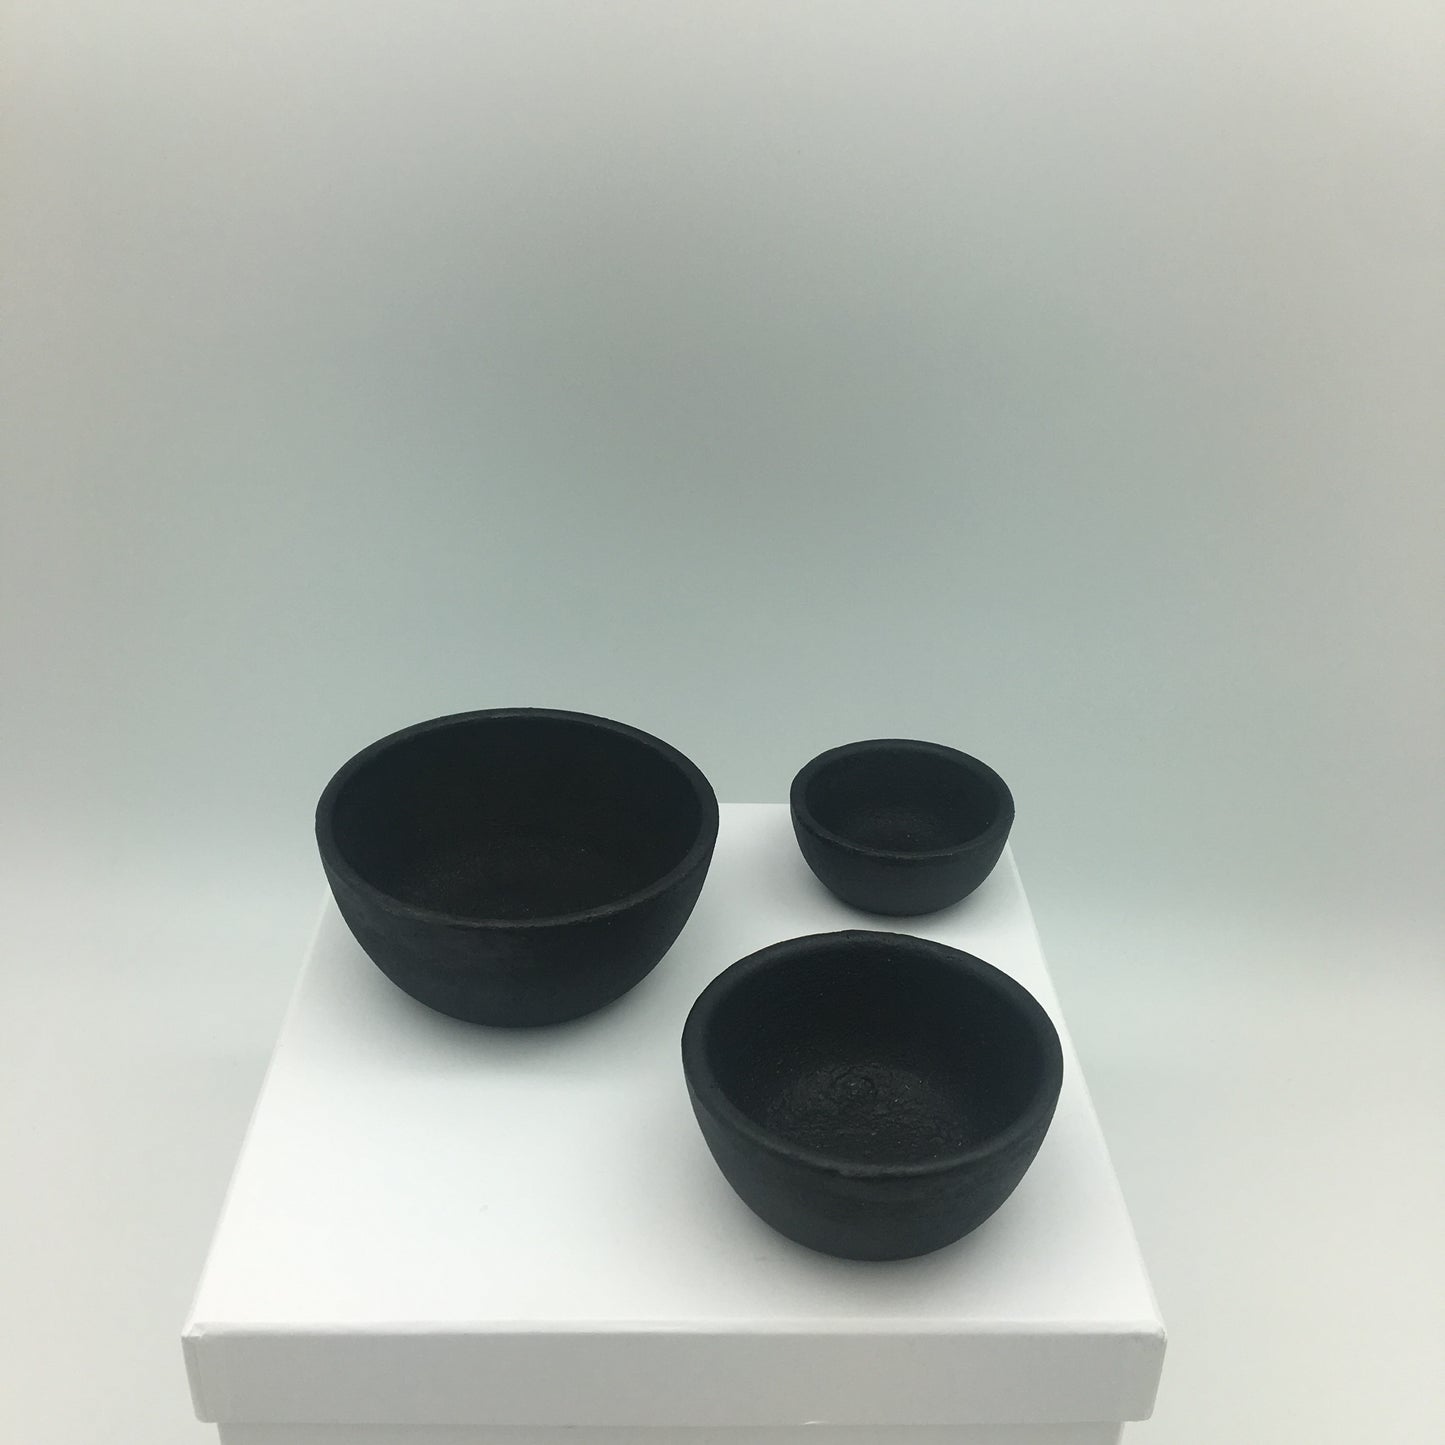 Hawkins Simple Cast Iron Bowls - Set of 3 Small